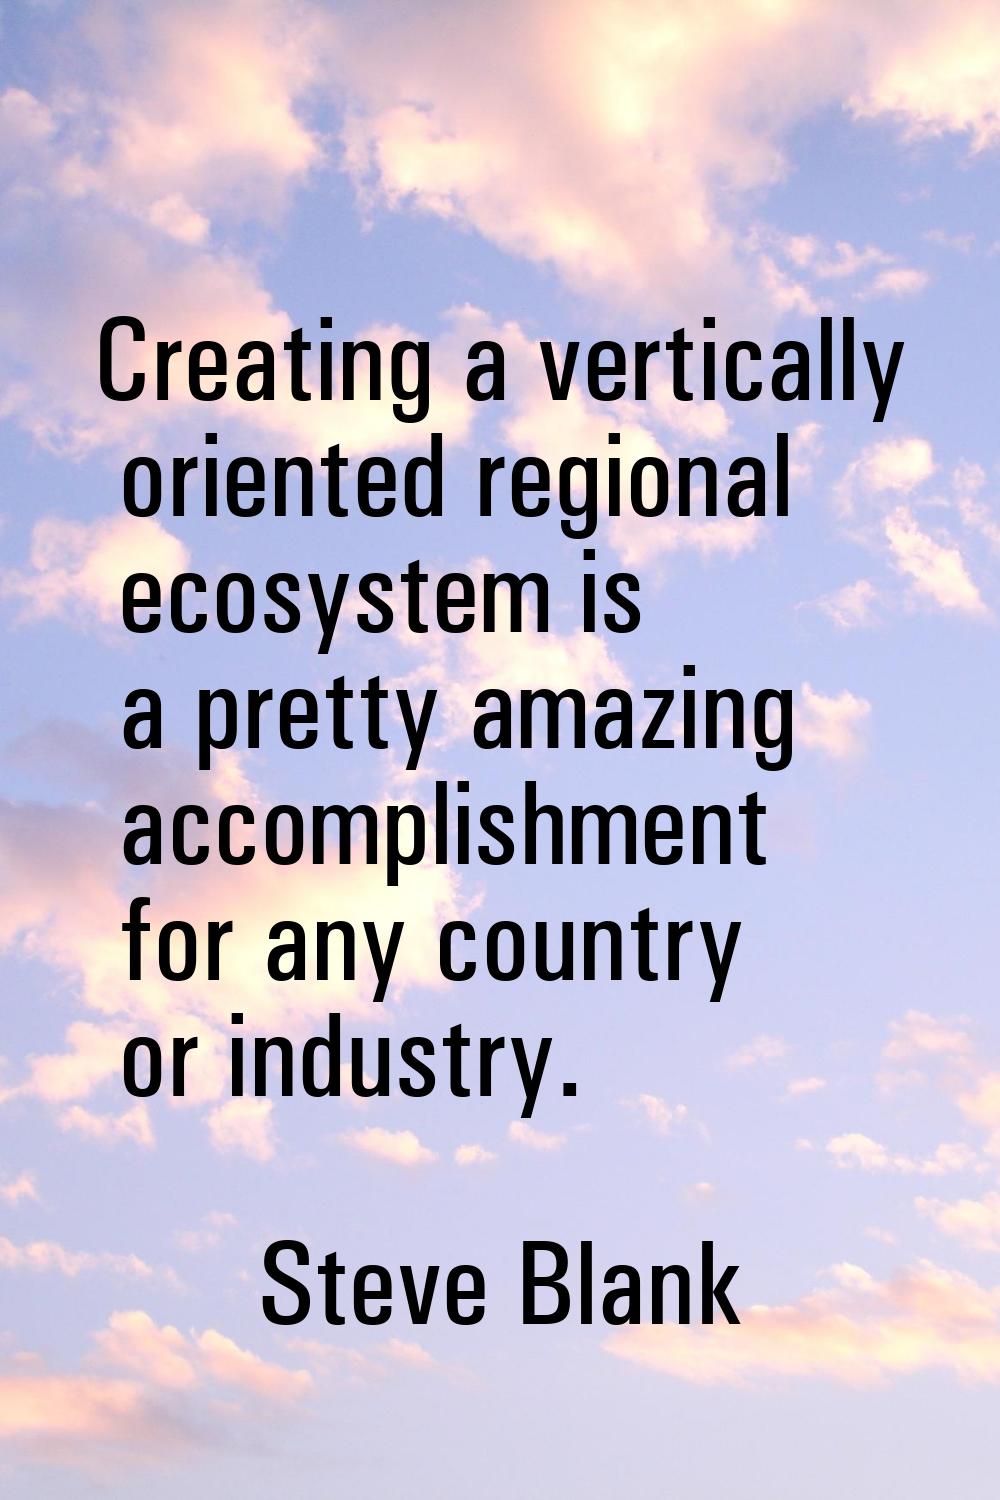 Creating a vertically oriented regional ecosystem is a pretty amazing accomplishment for any countr